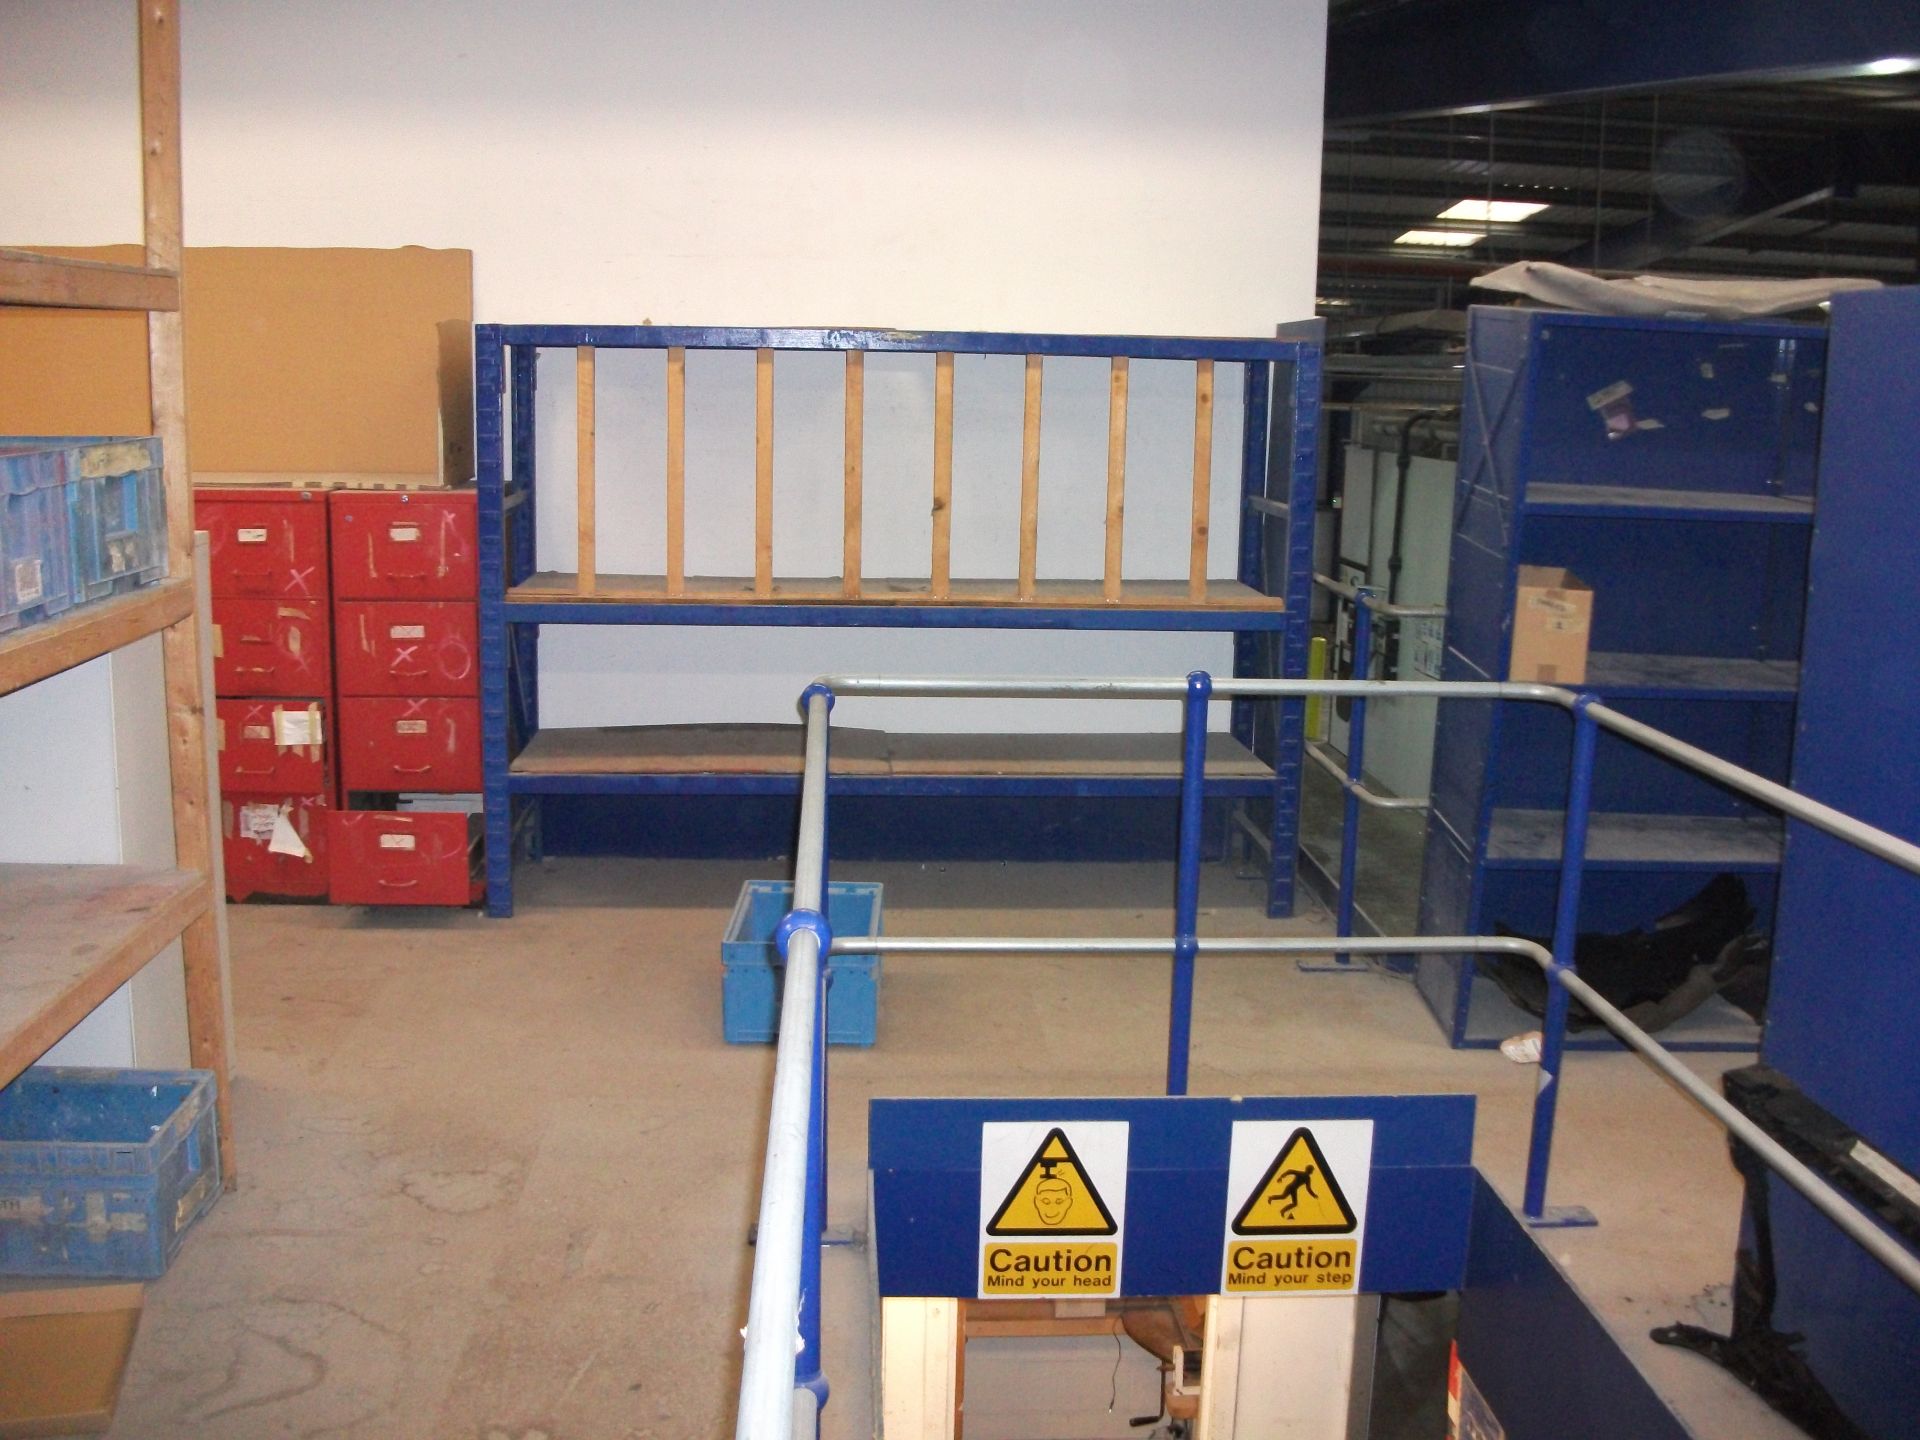 Contents and various racking to under mezzanine storage area and on mezzanine - Image 9 of 9